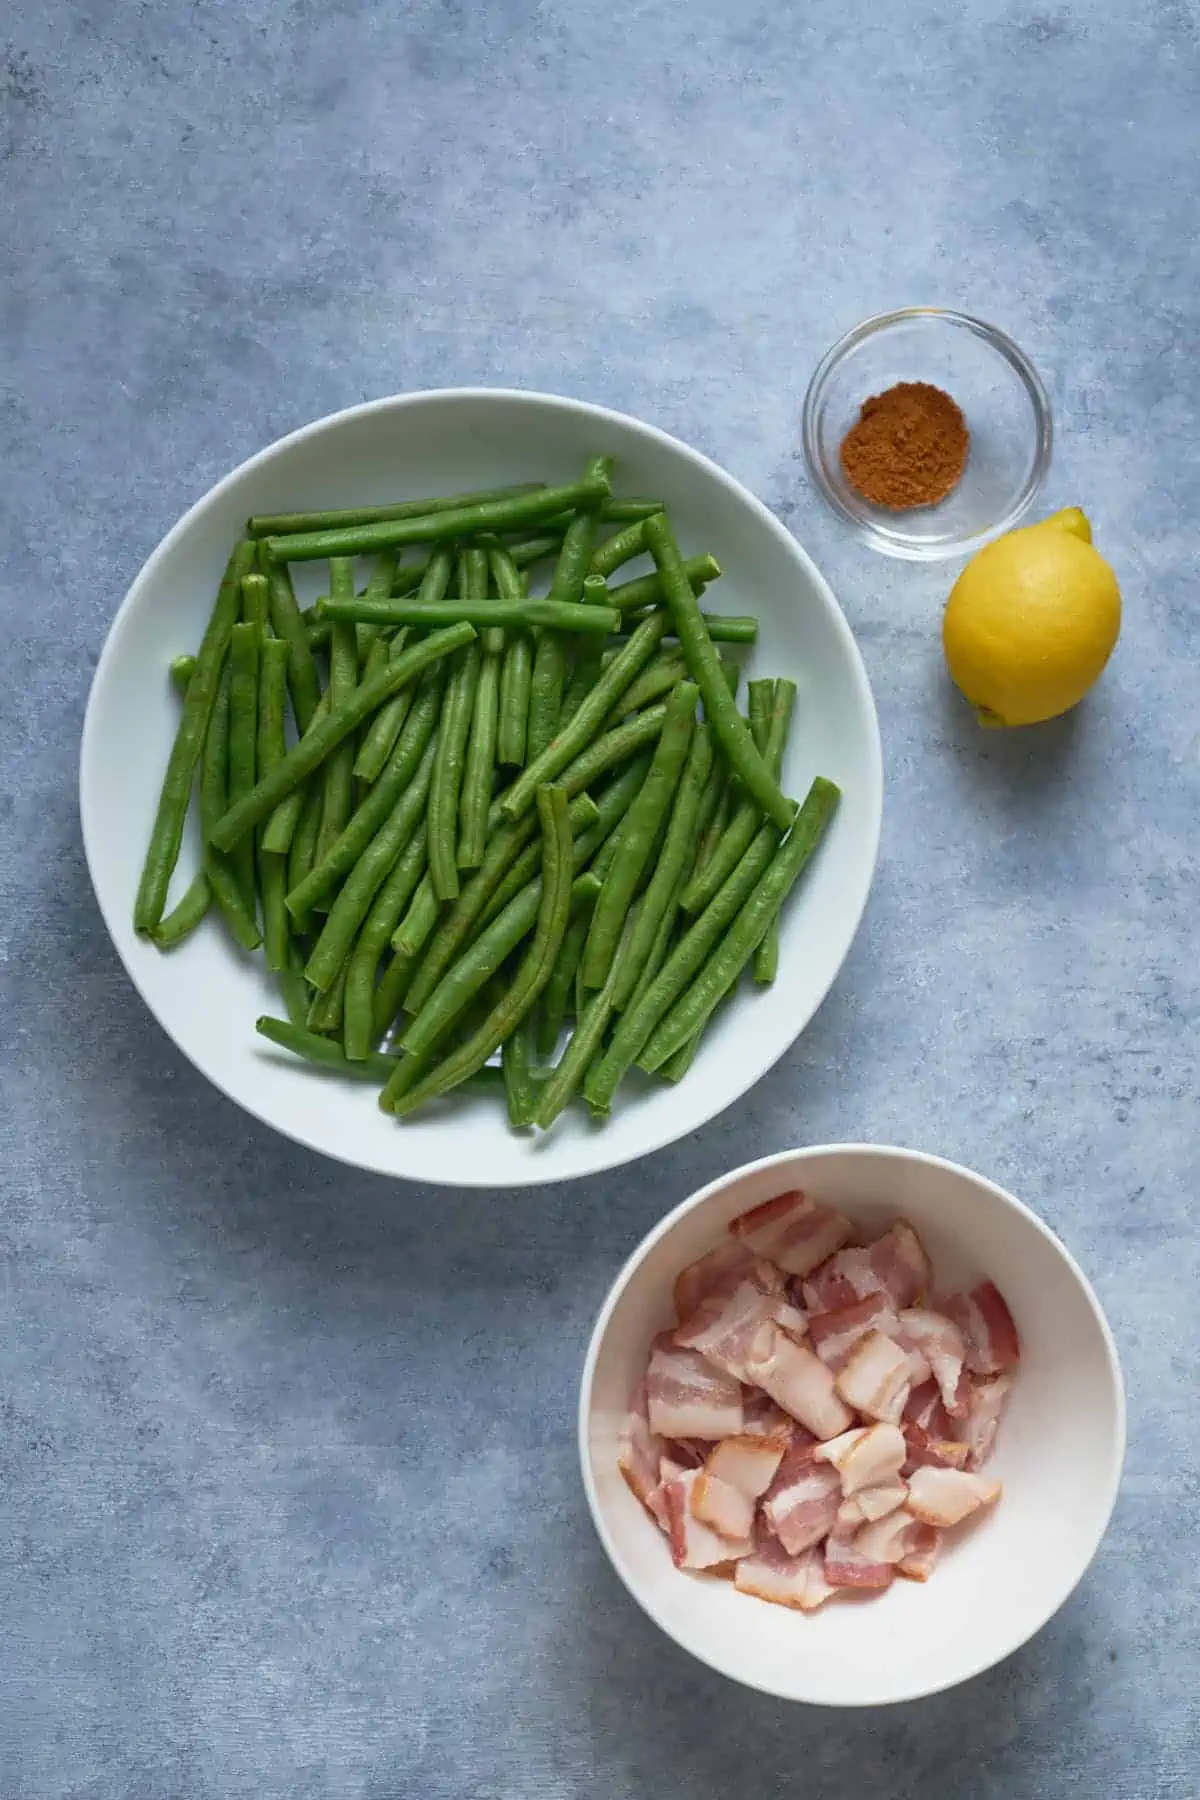 Ingredients to make green beans and bacon.